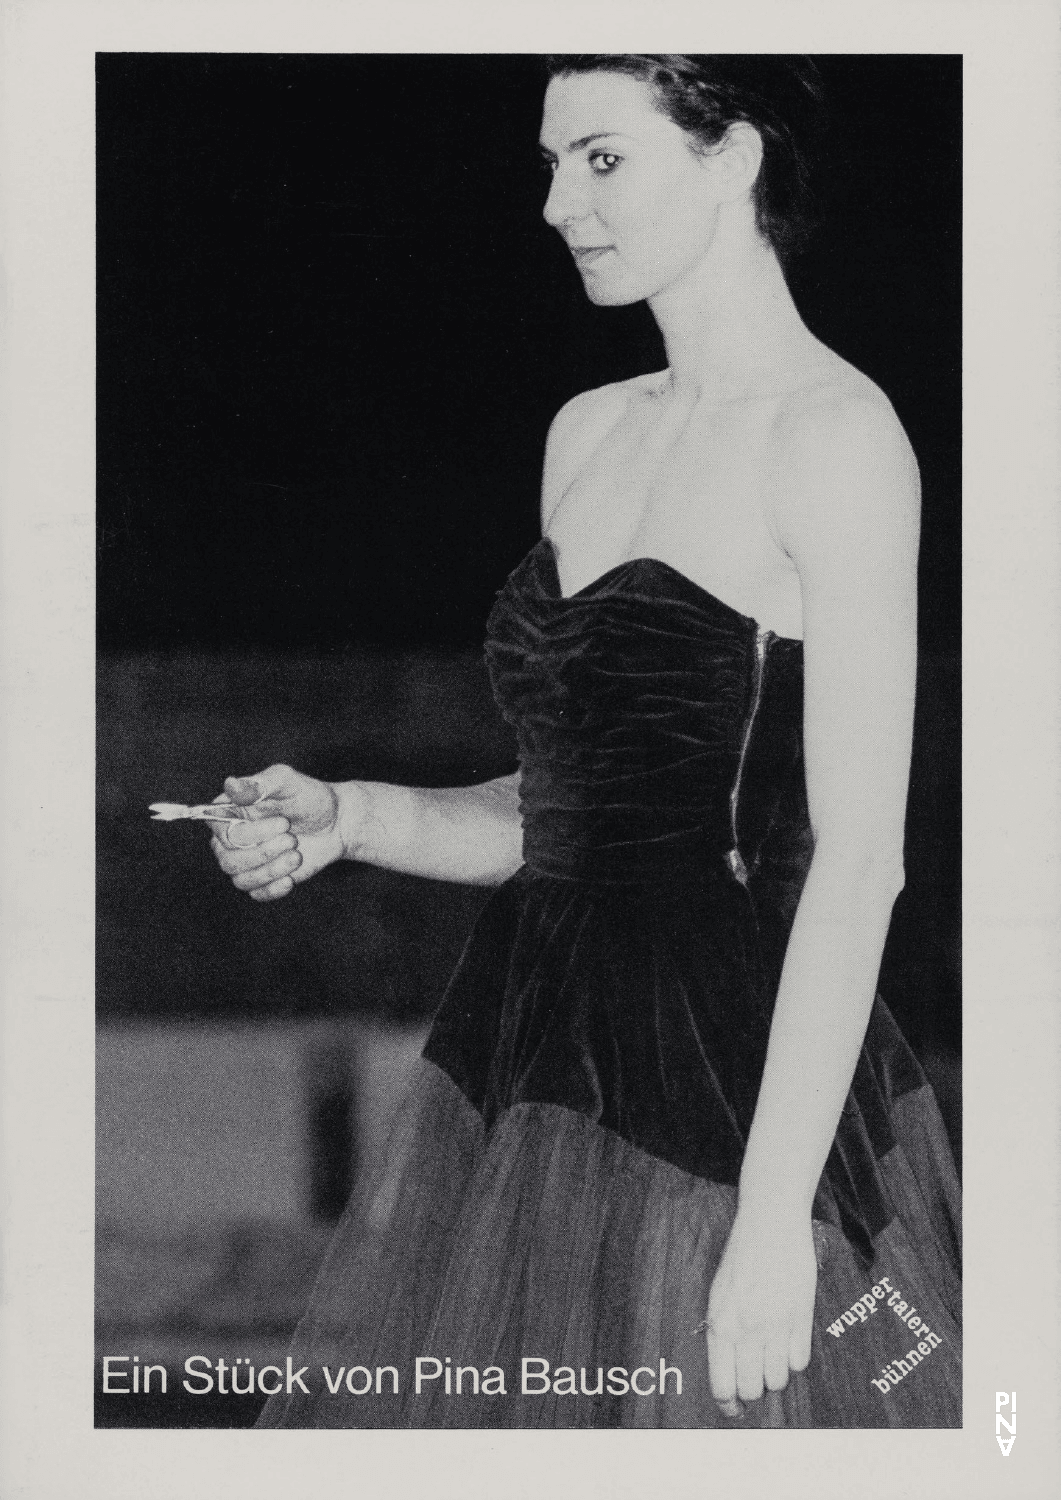 Booklet for “Two Cigarettes in the Dark” by Pina Bausch with Tanztheater Wuppertal in in Wuppertal, March 31, 1985